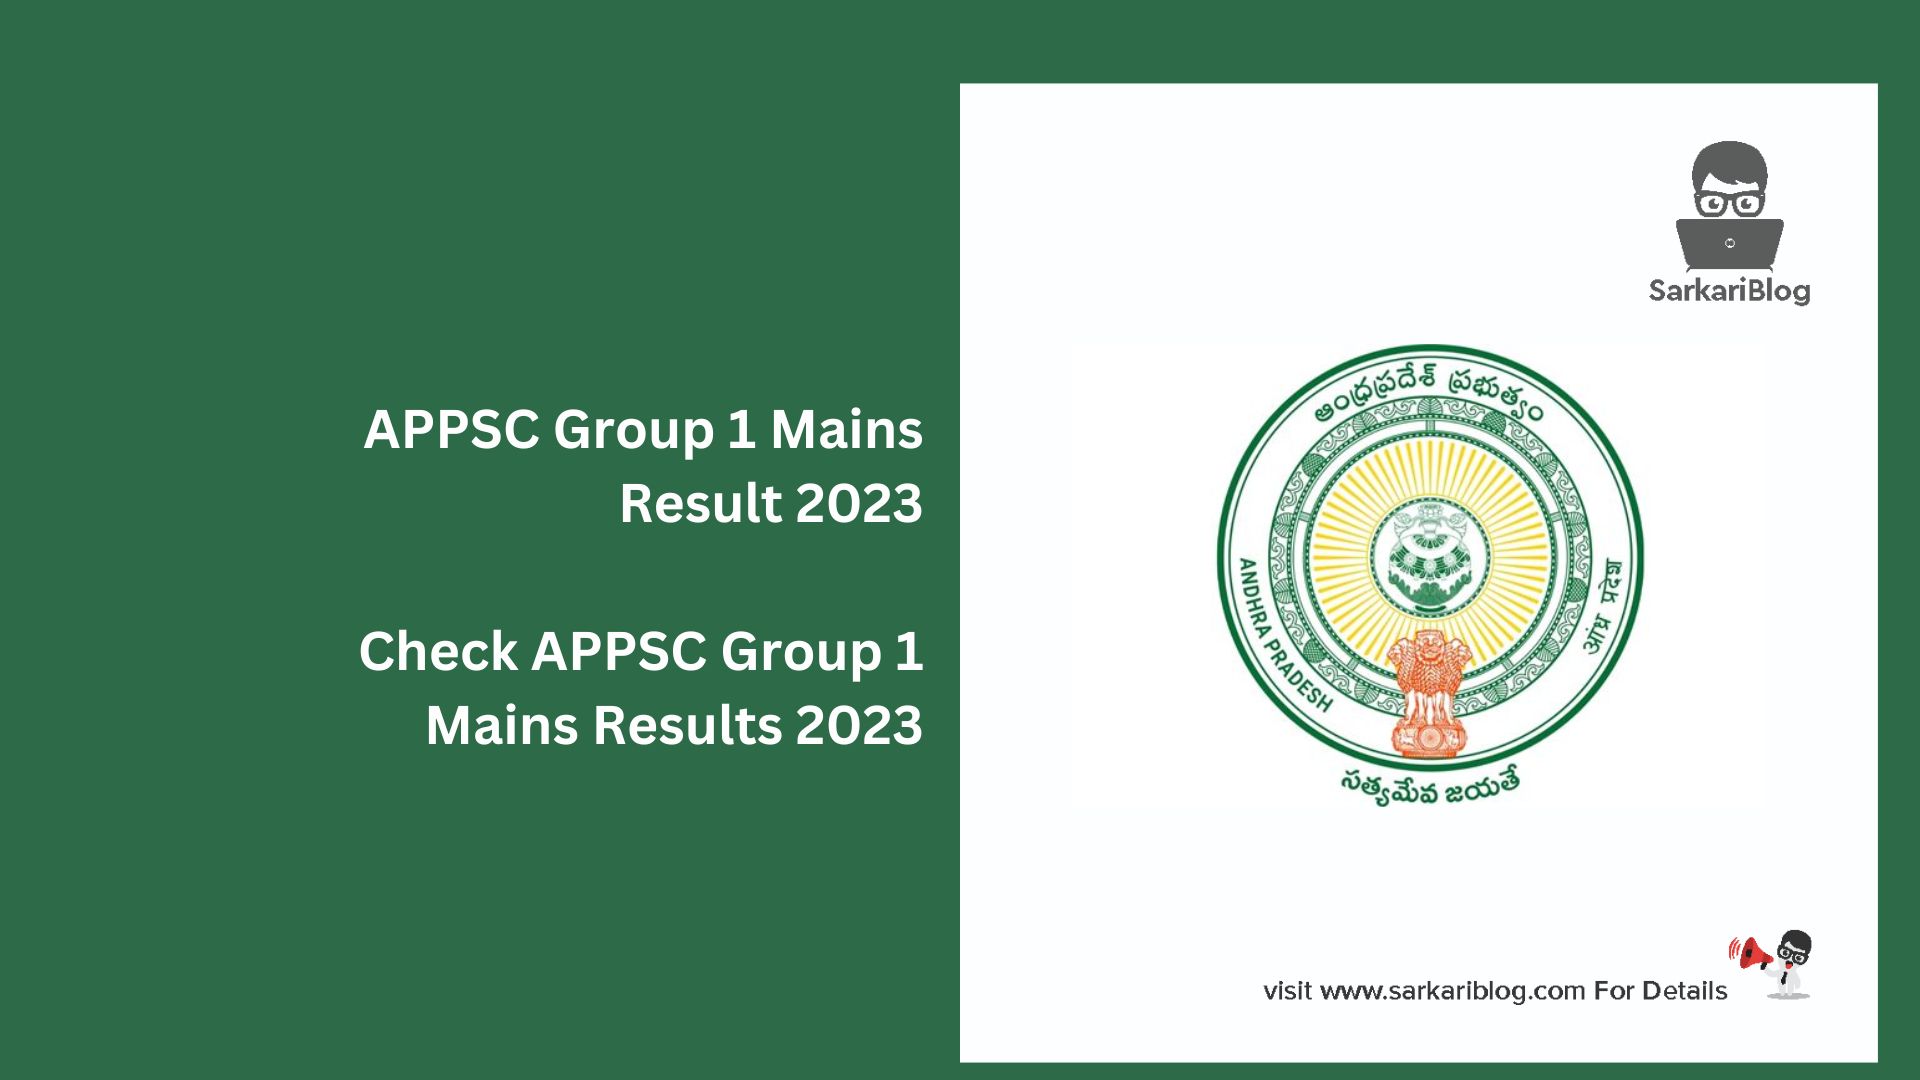 APPSC Group 1 Mains Result 2023